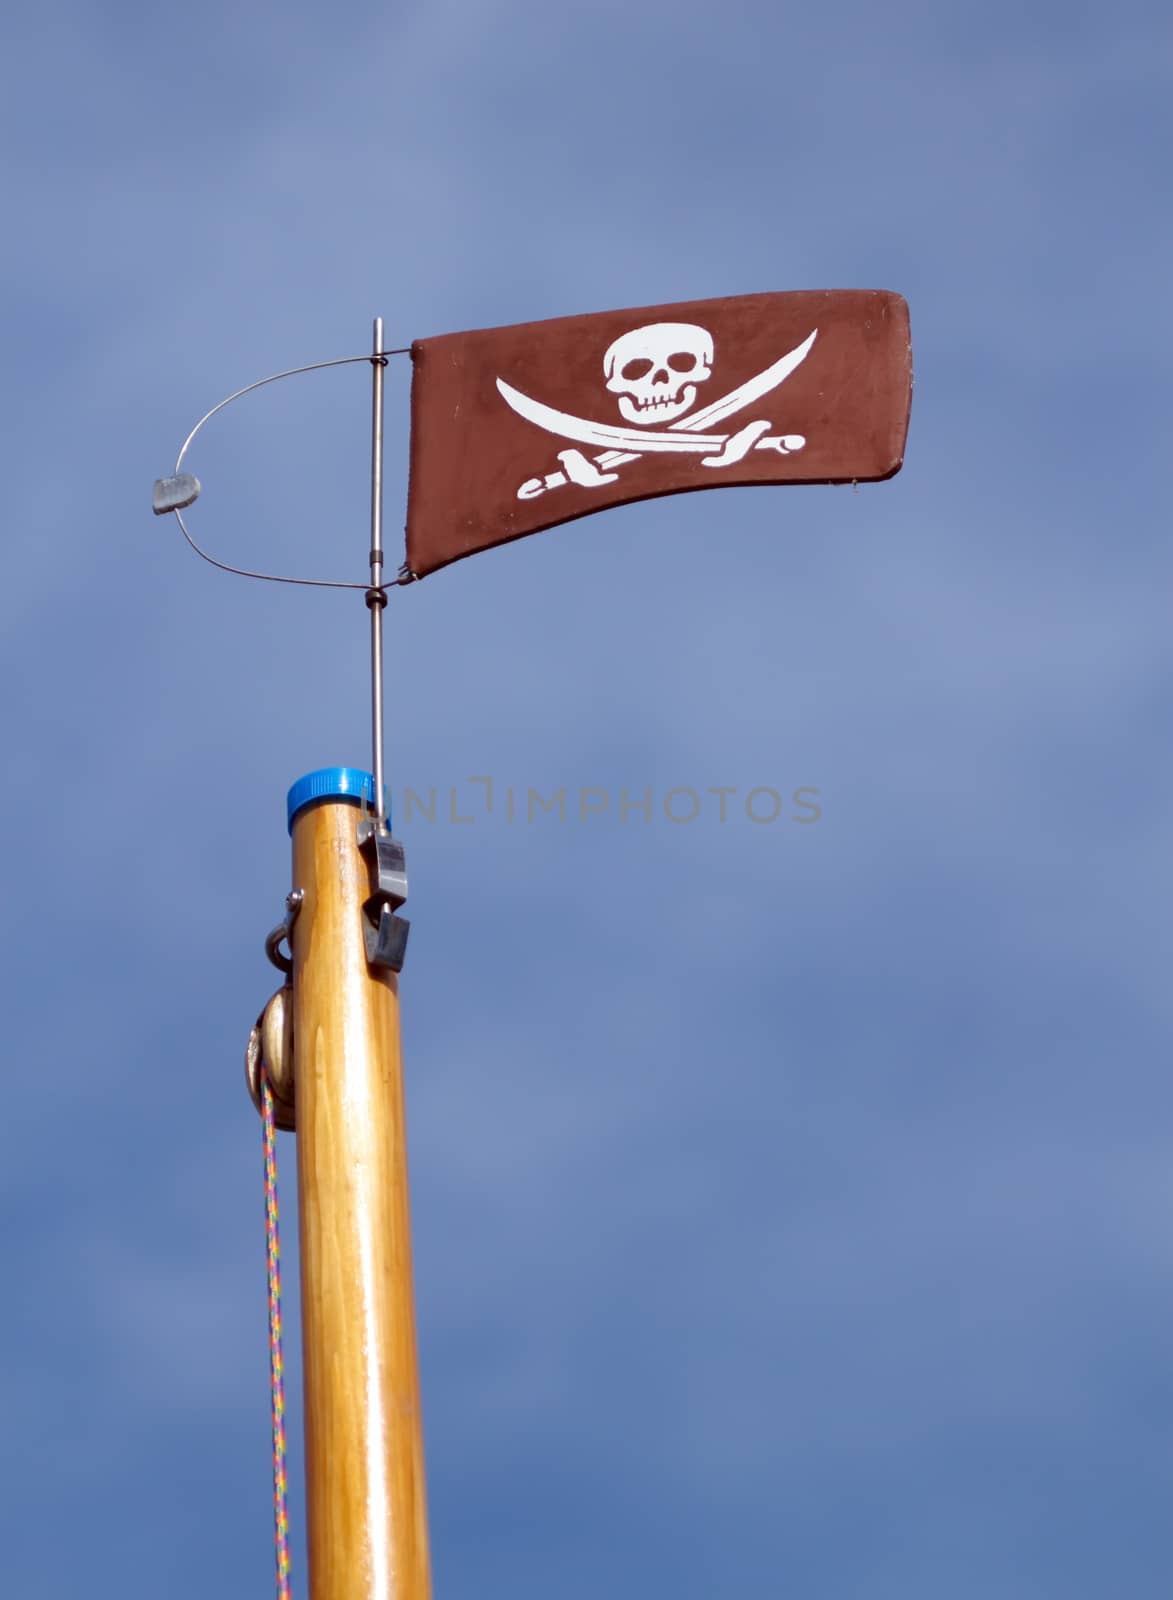 Jolly Roger skull and crossbones pirate flag by Elenaphotos21